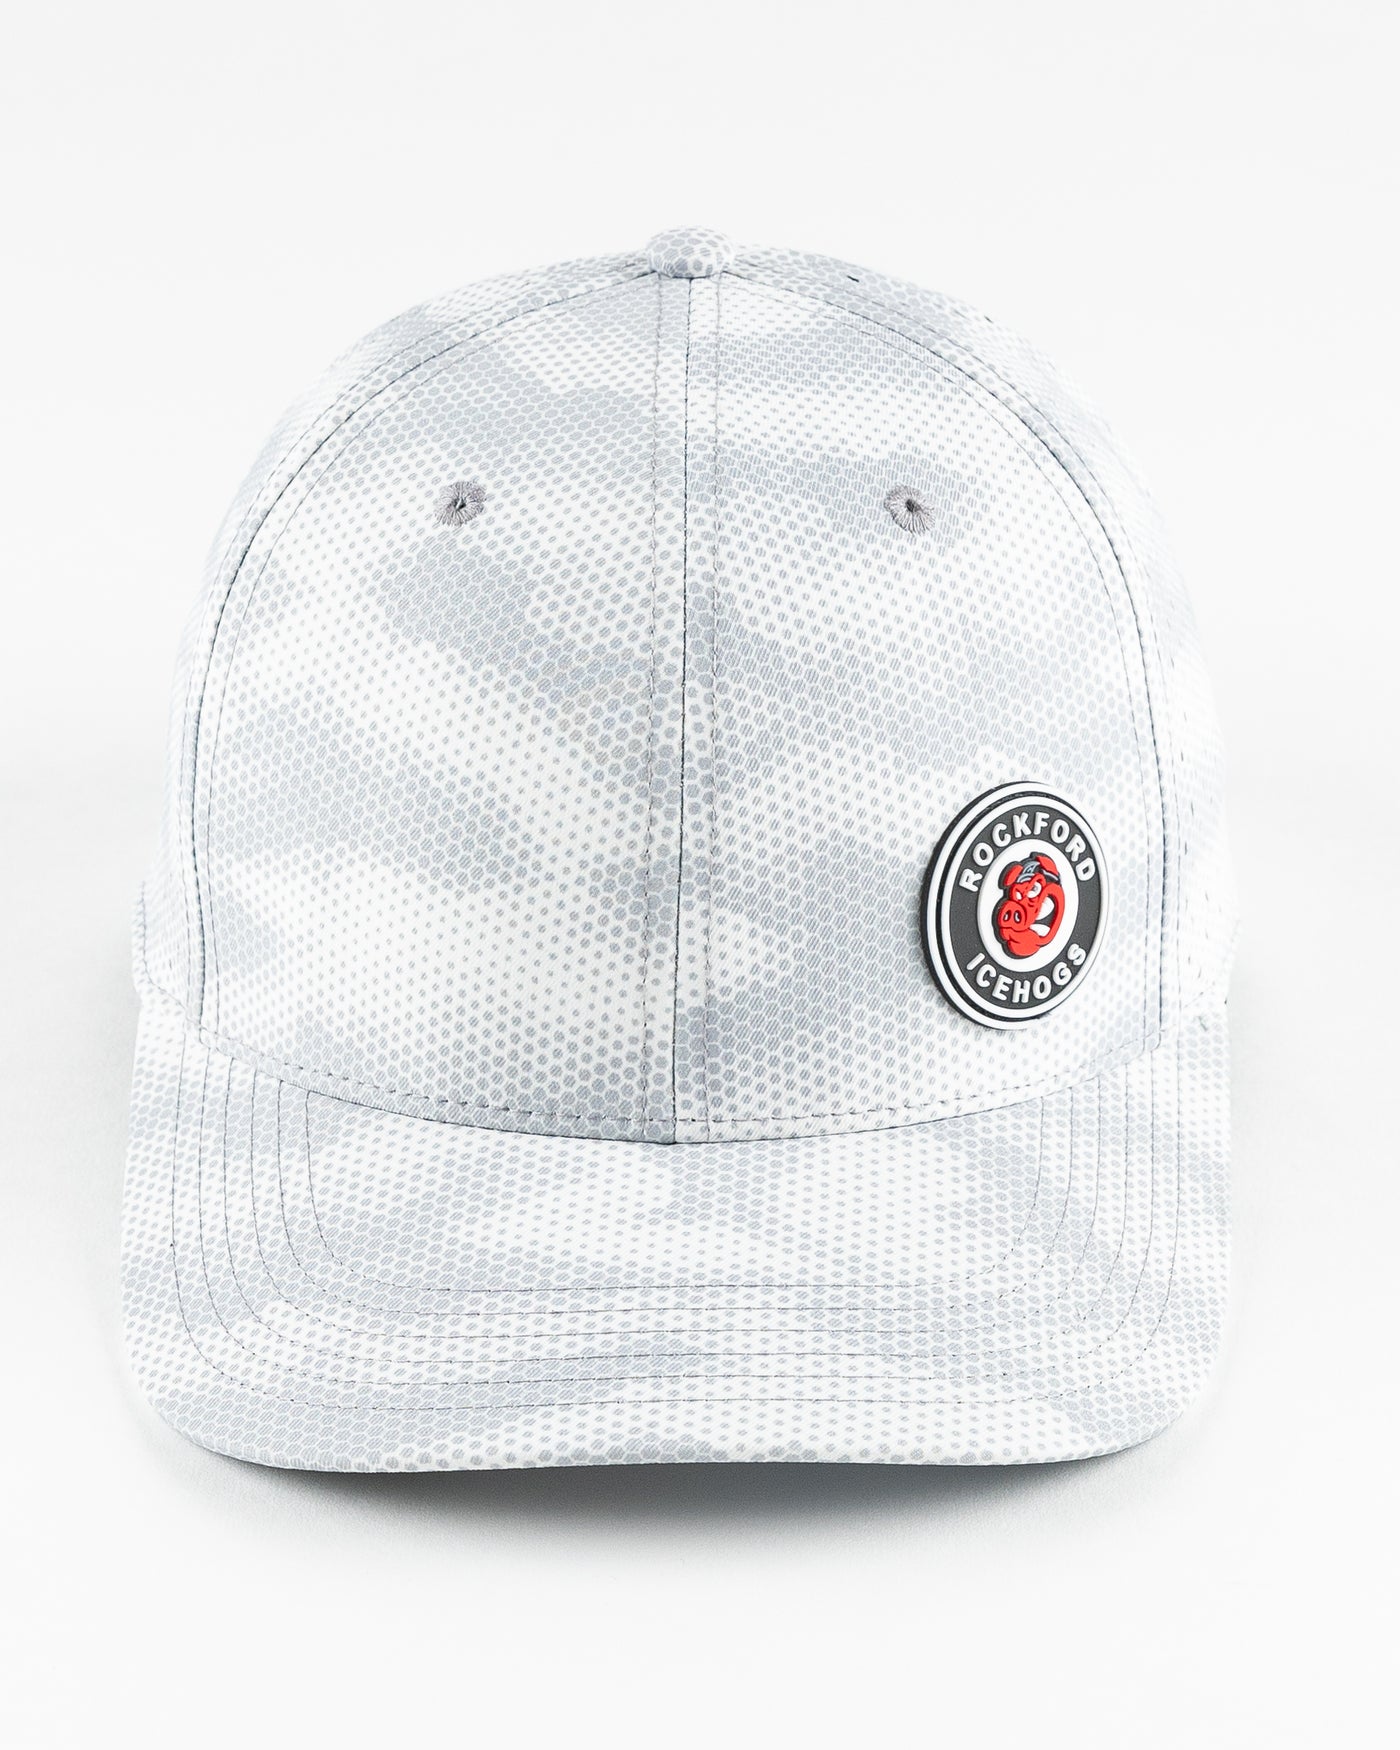 grey Rockford IceHogs adjustable cap with grey camo dot design and rubber patch on front panel - front lay flat